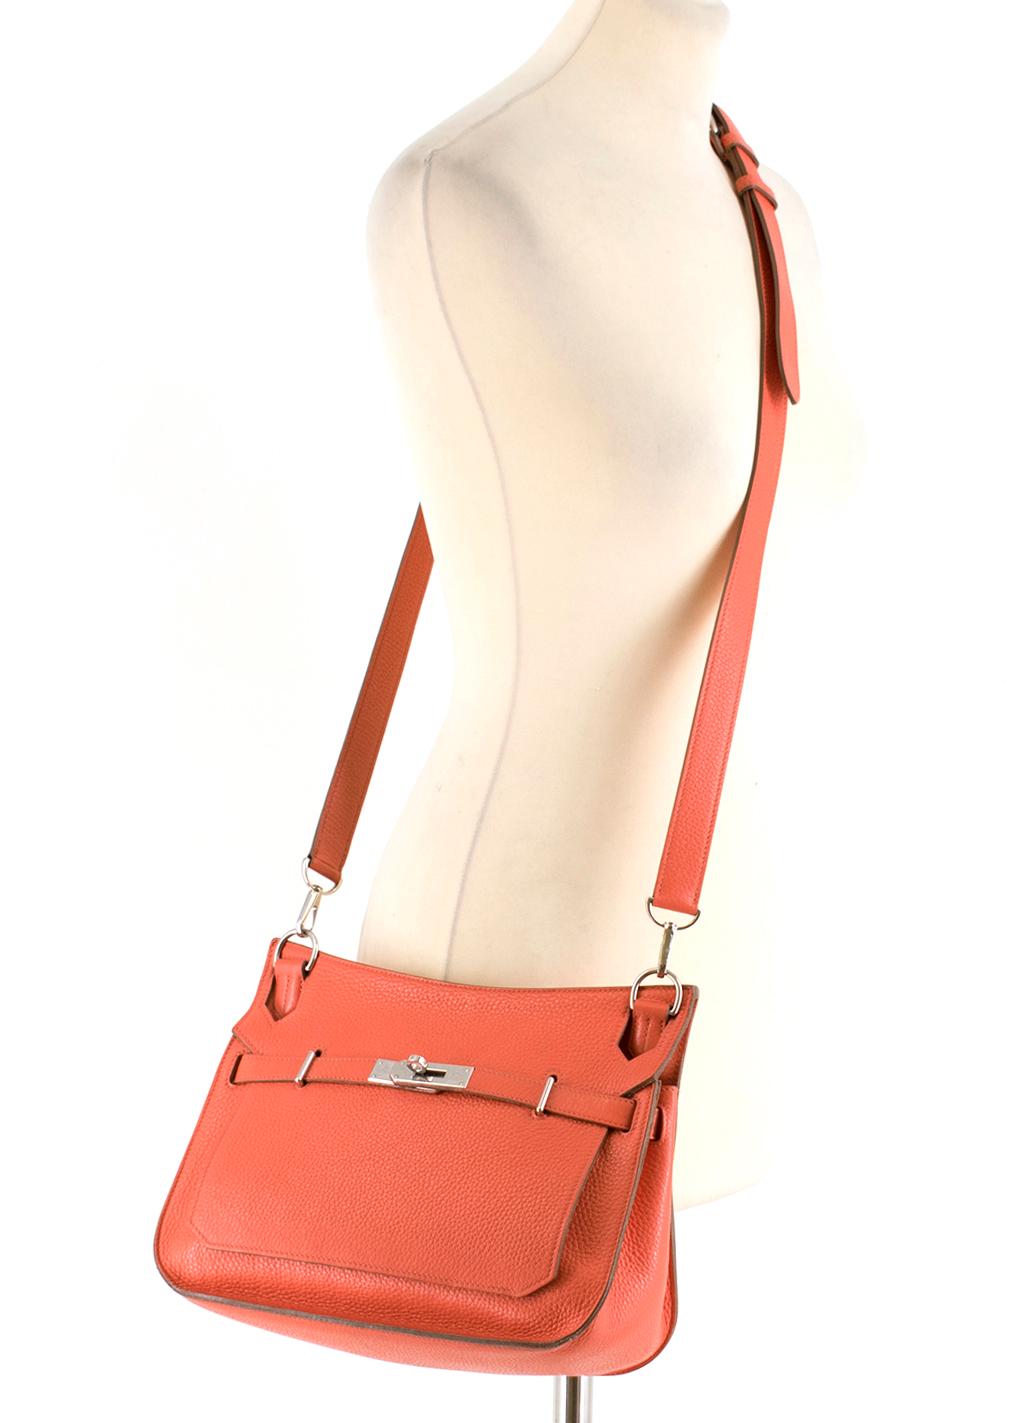 Red Hermes Capucine Clemence Leather Jypsiere 28 Bag 